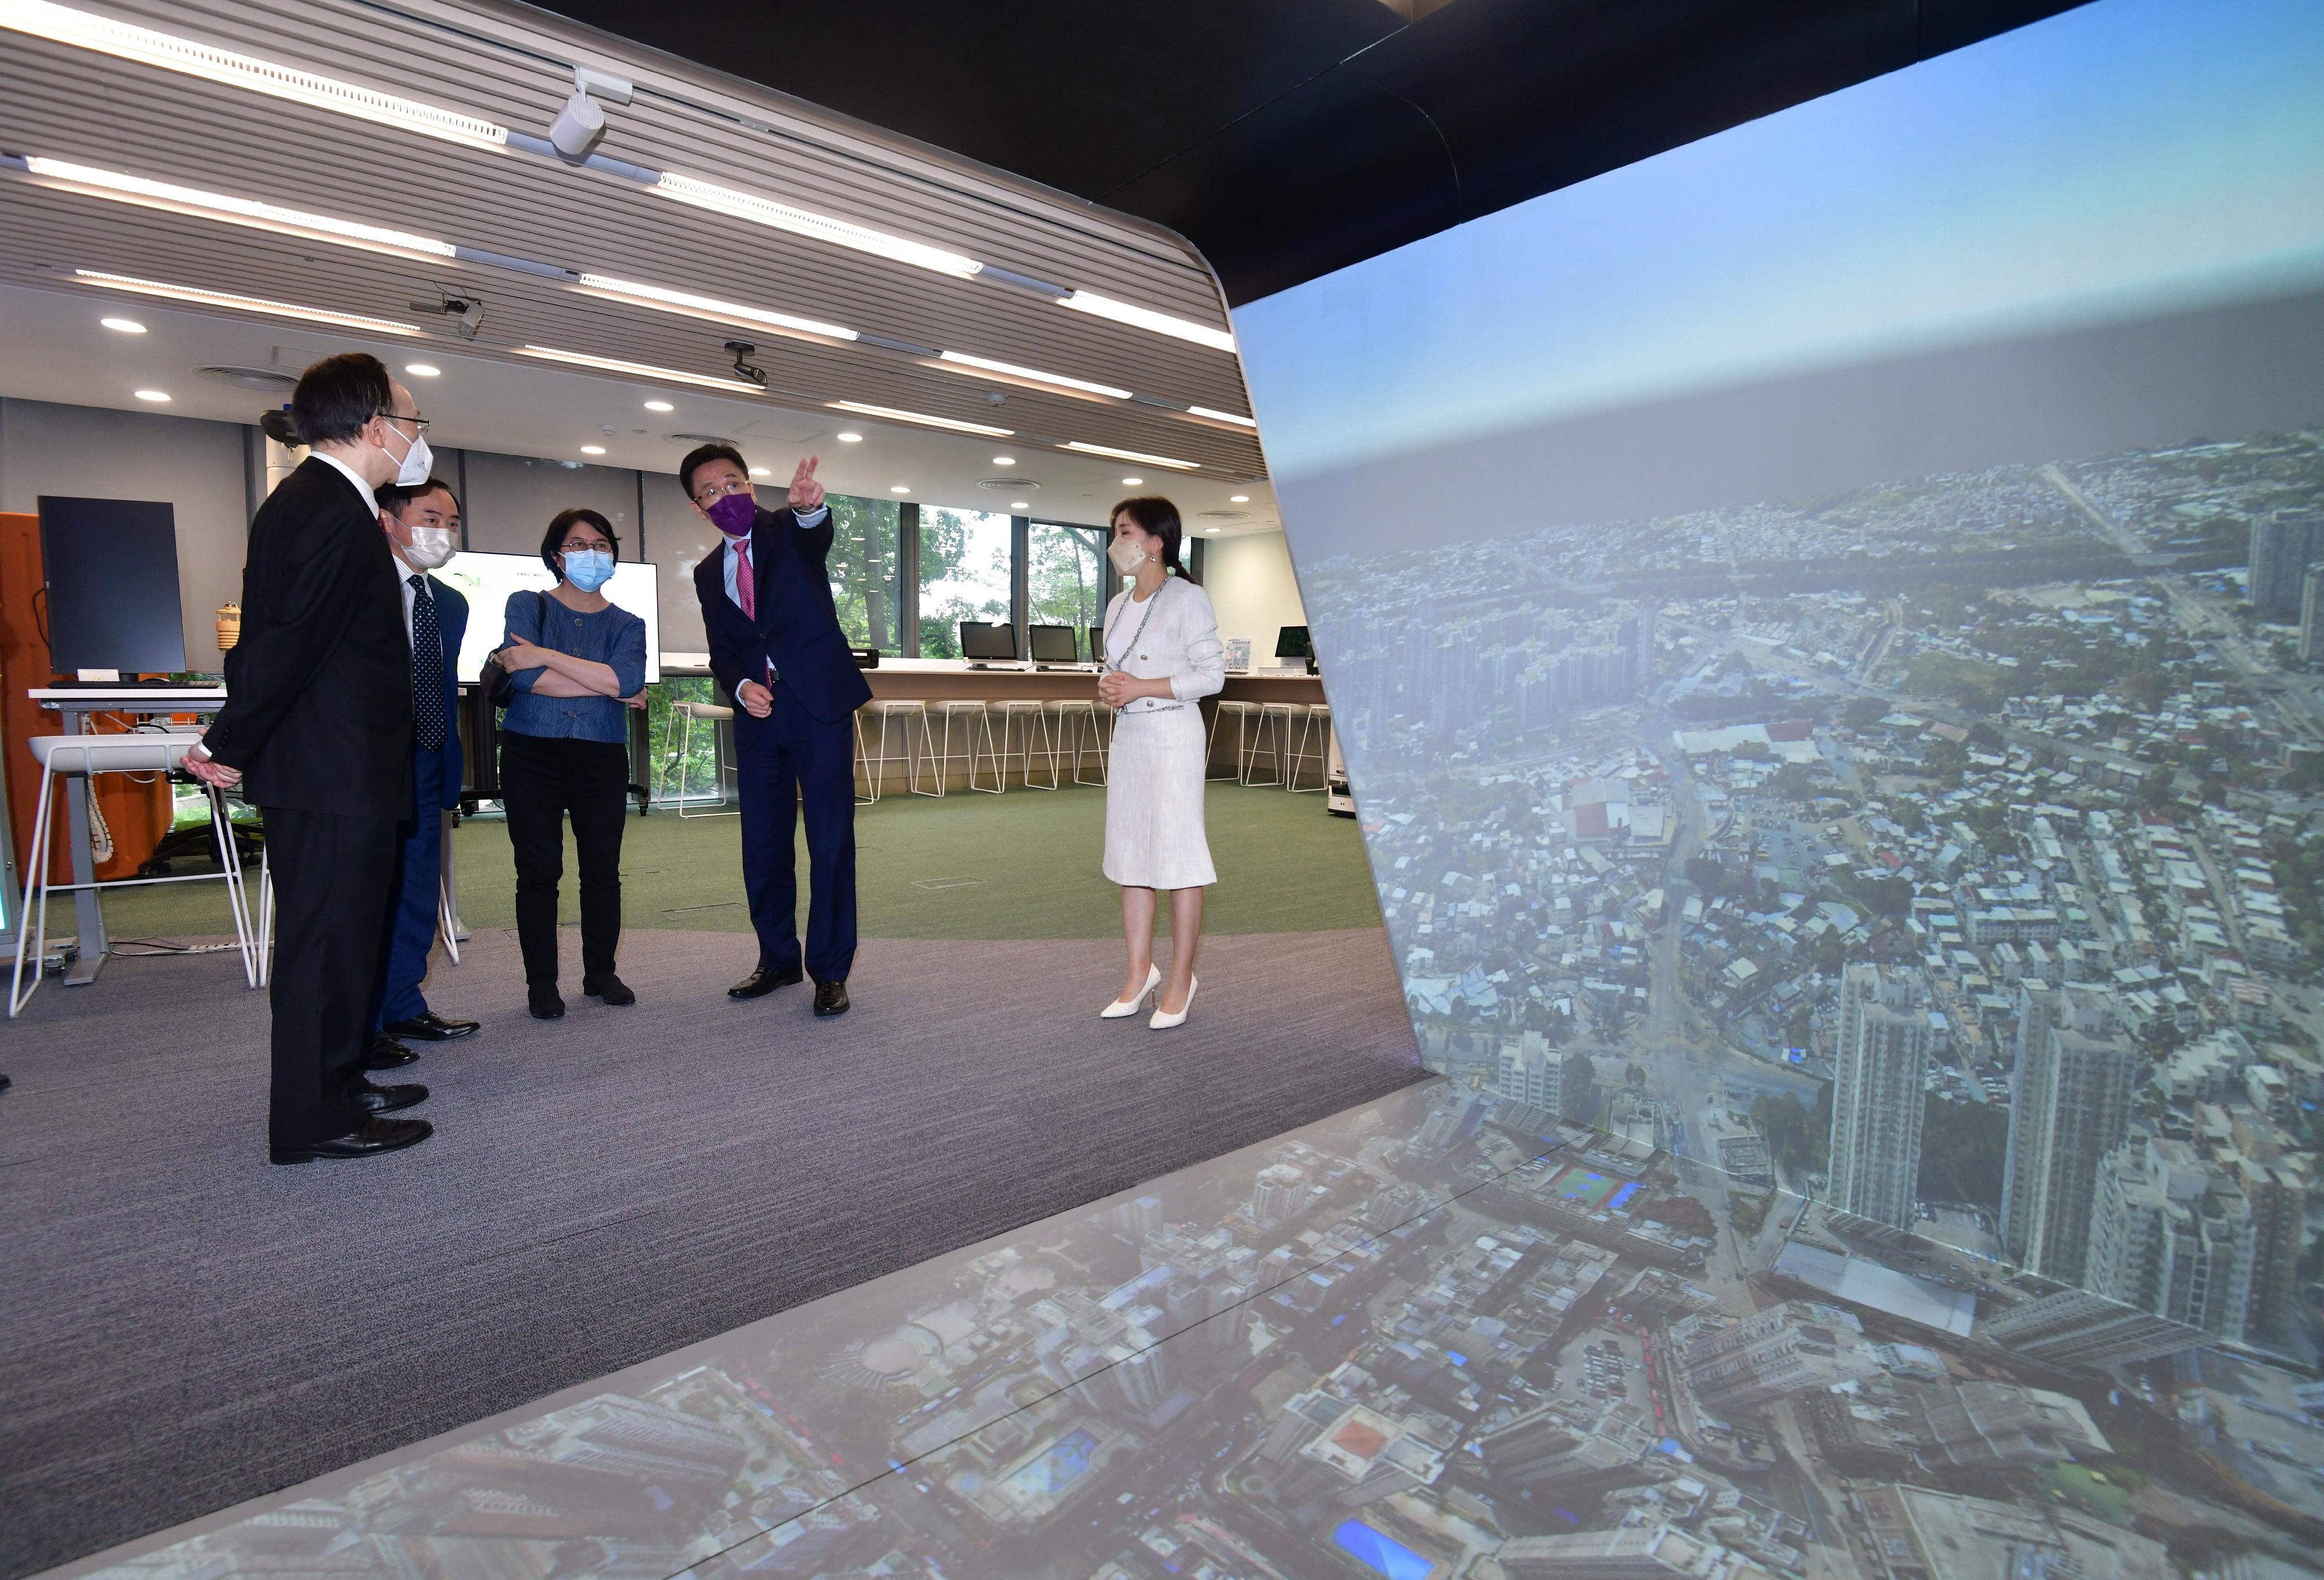 The Secretary for Innovation, Technology and Industry, Professor Sun Dong (second right), accompanied by the Permanent Secretary for Innovation, Technology and Industry, Ms Annie Choi (centre); the Government Chief Information Officer, Mr Victor Lam (first left); and the Deputy Government Chief Information Officer, Mr Tony Wong (second left), visits the Smart Government Innovation Lab located at Cyberport today (July 5).